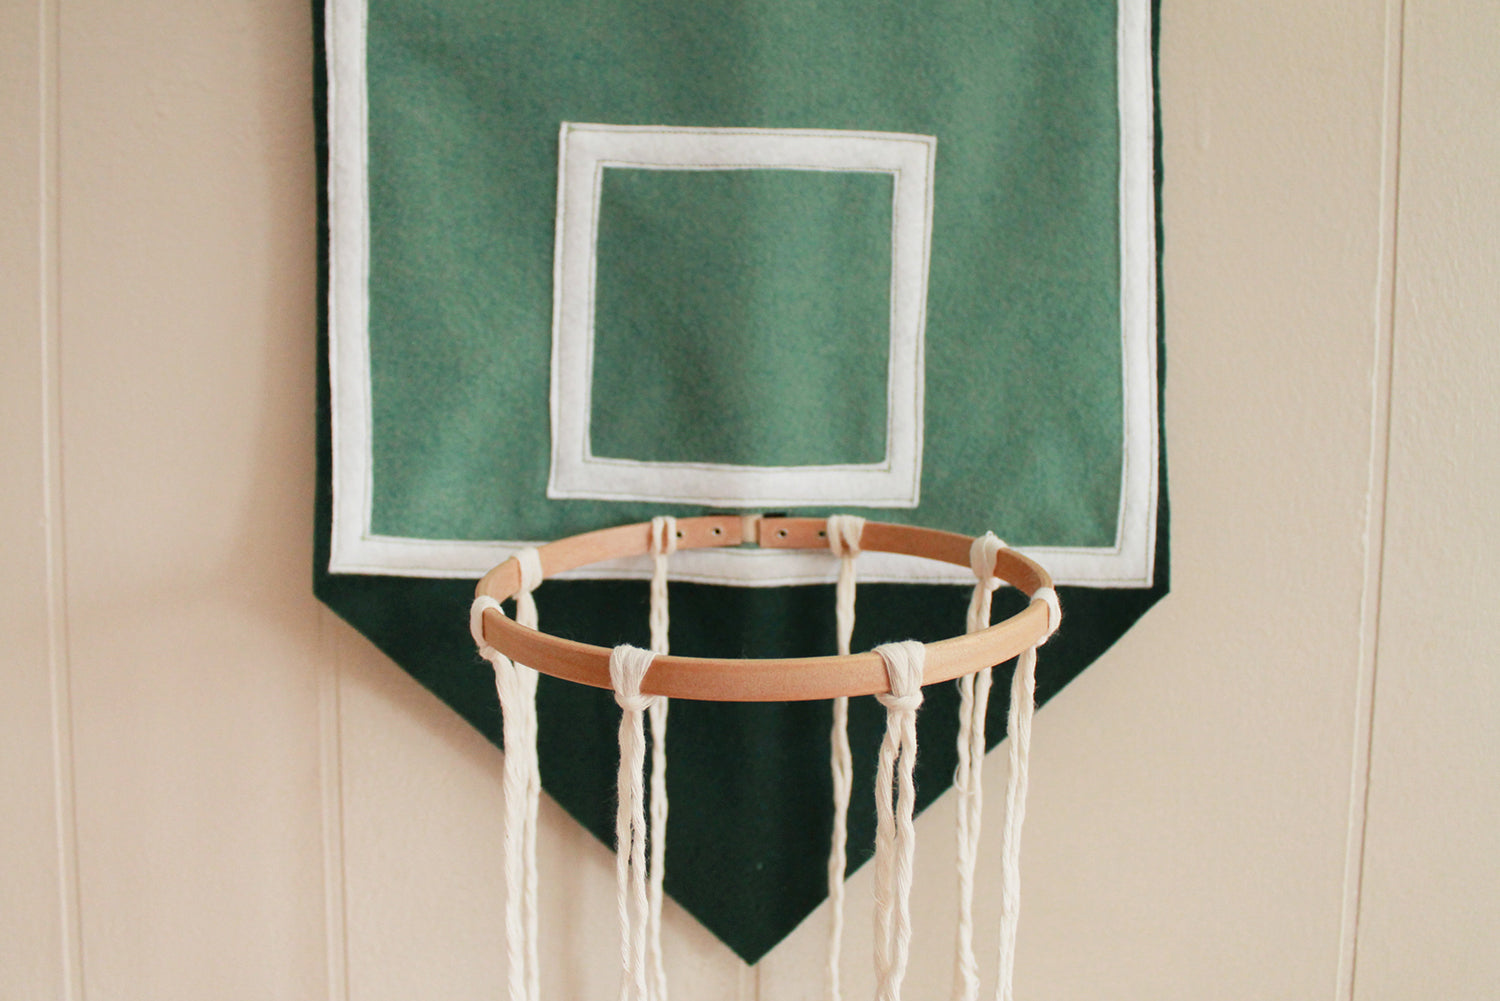 Add ropes around the embroidery hoop